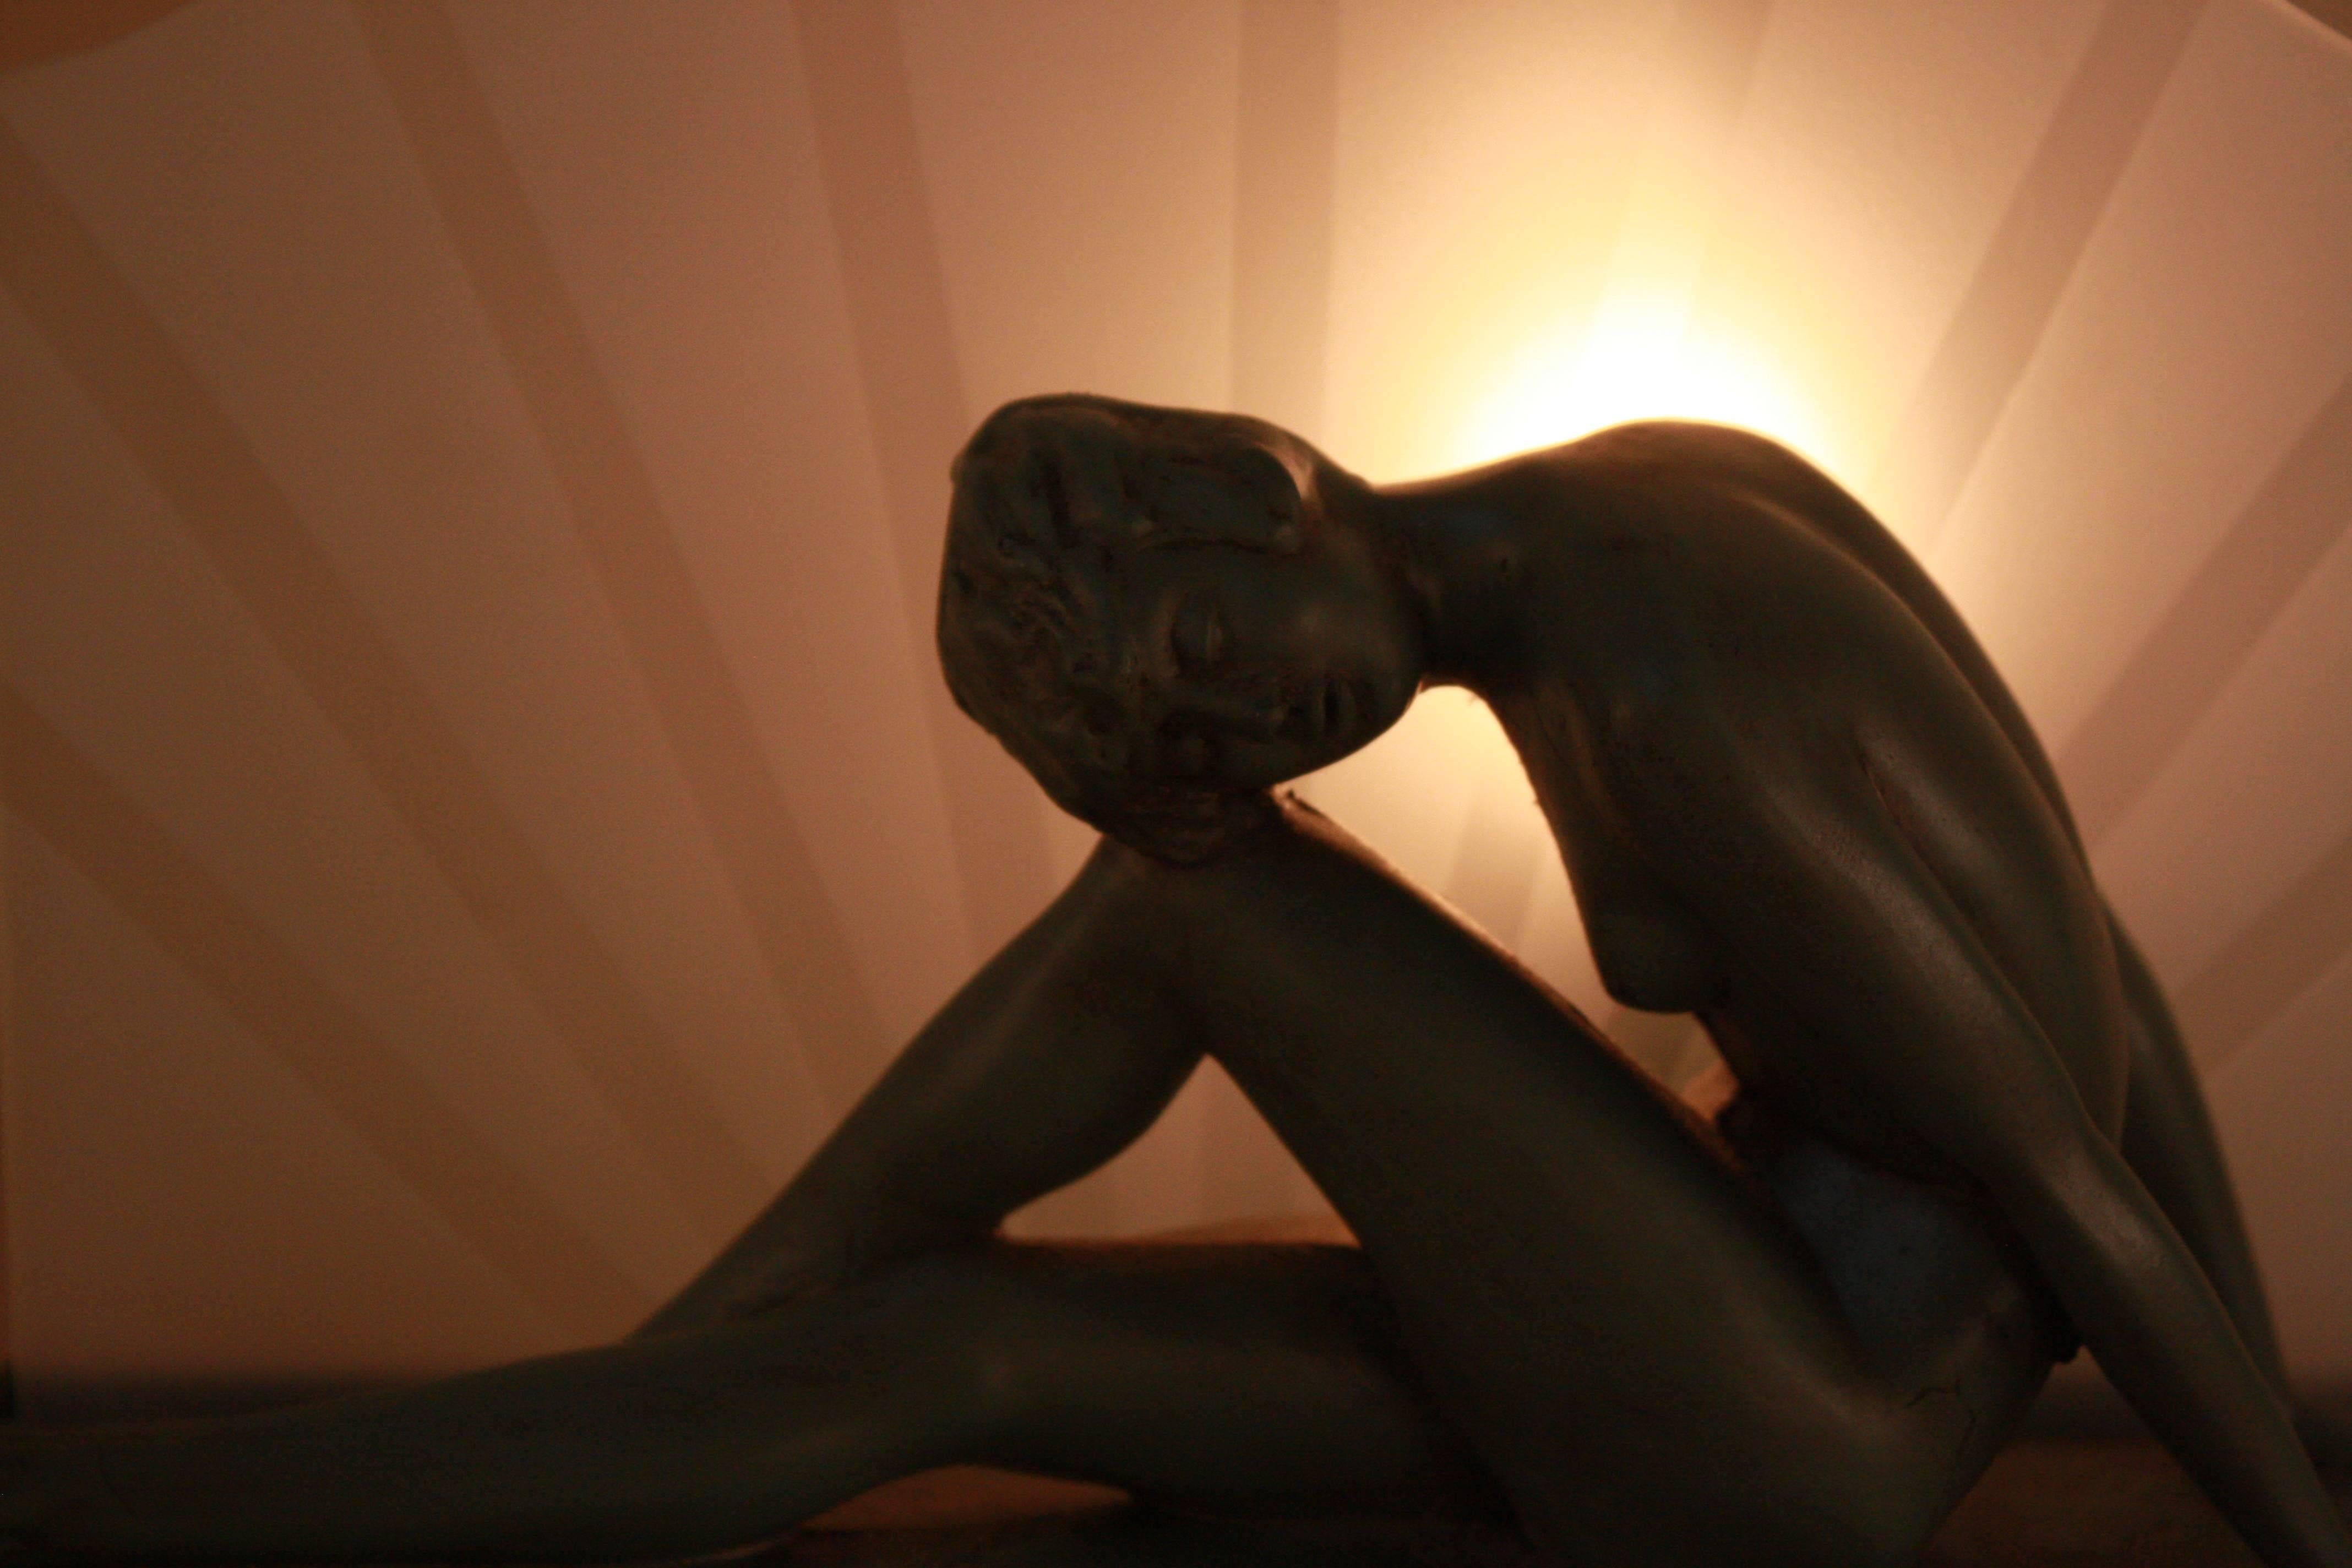 Made during 1930s, nude sitting woman in front of sun blast glass table lamp.